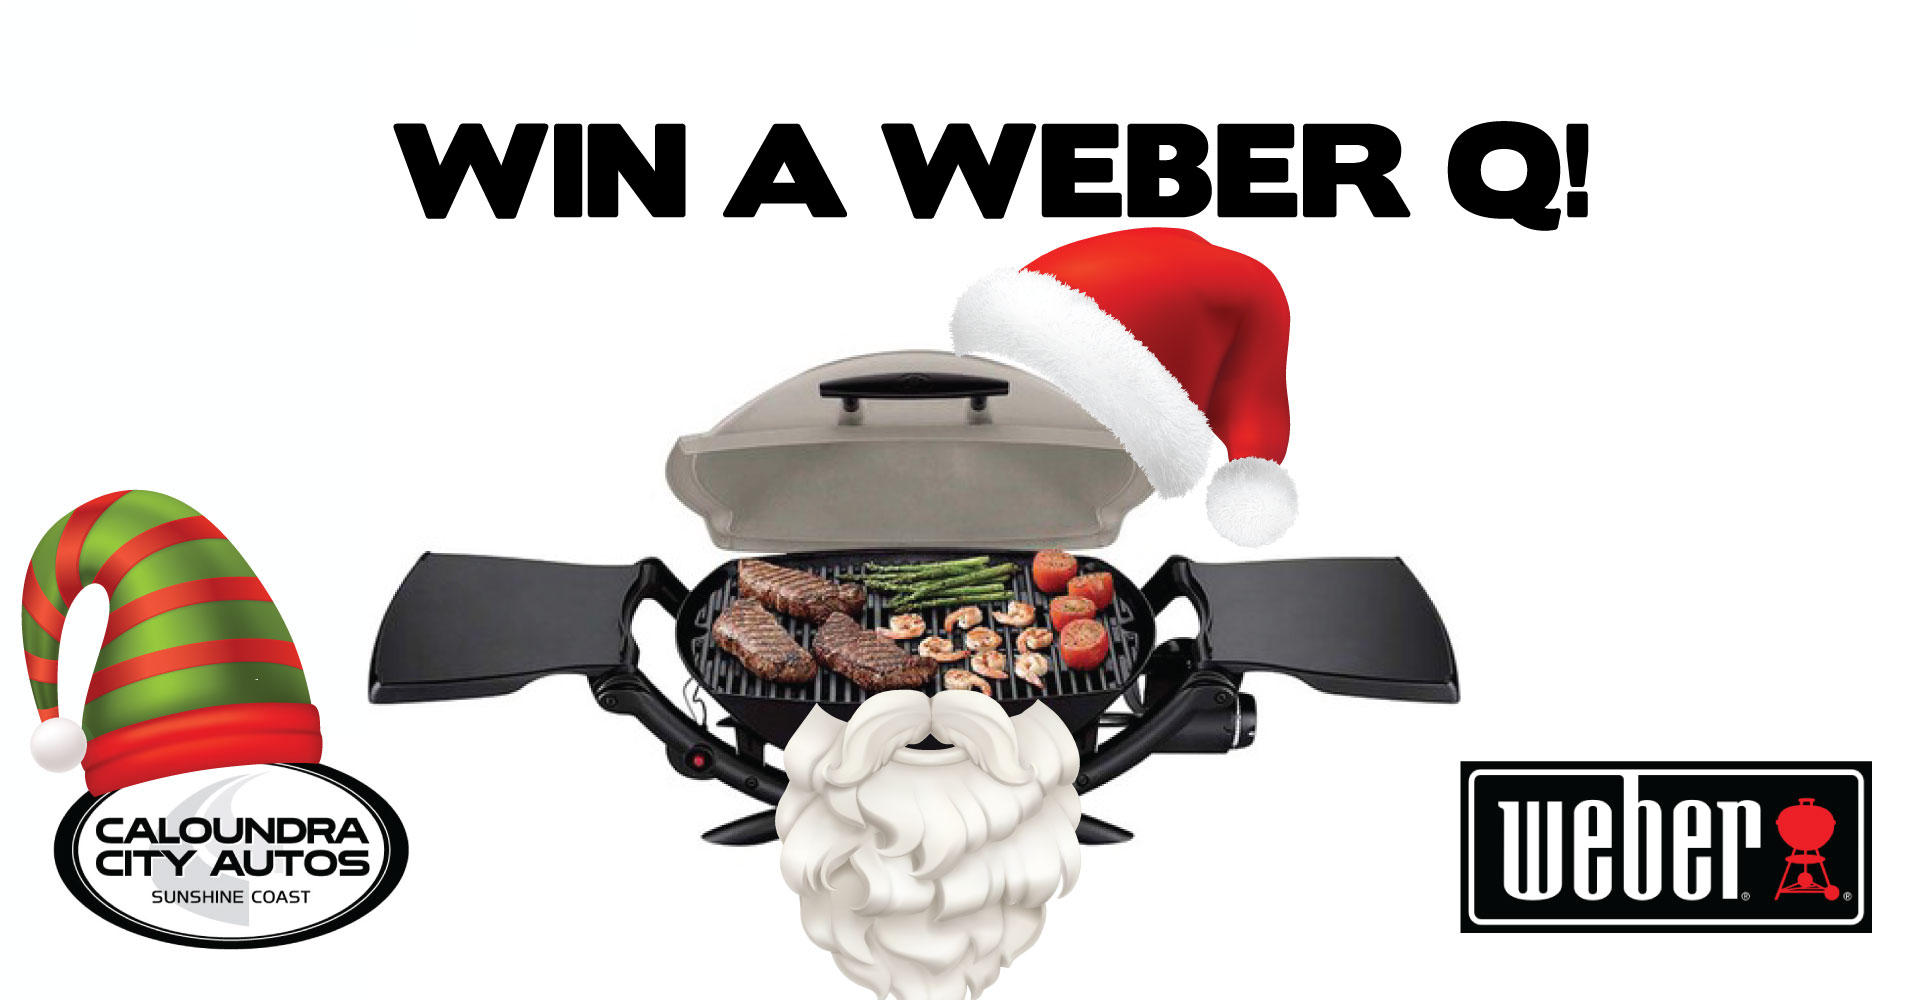 BOOK YOUR NEXT LOGBOOK SERVICE IN 2021 FOR YOUR CHANCE TO WIN A WEBER Q